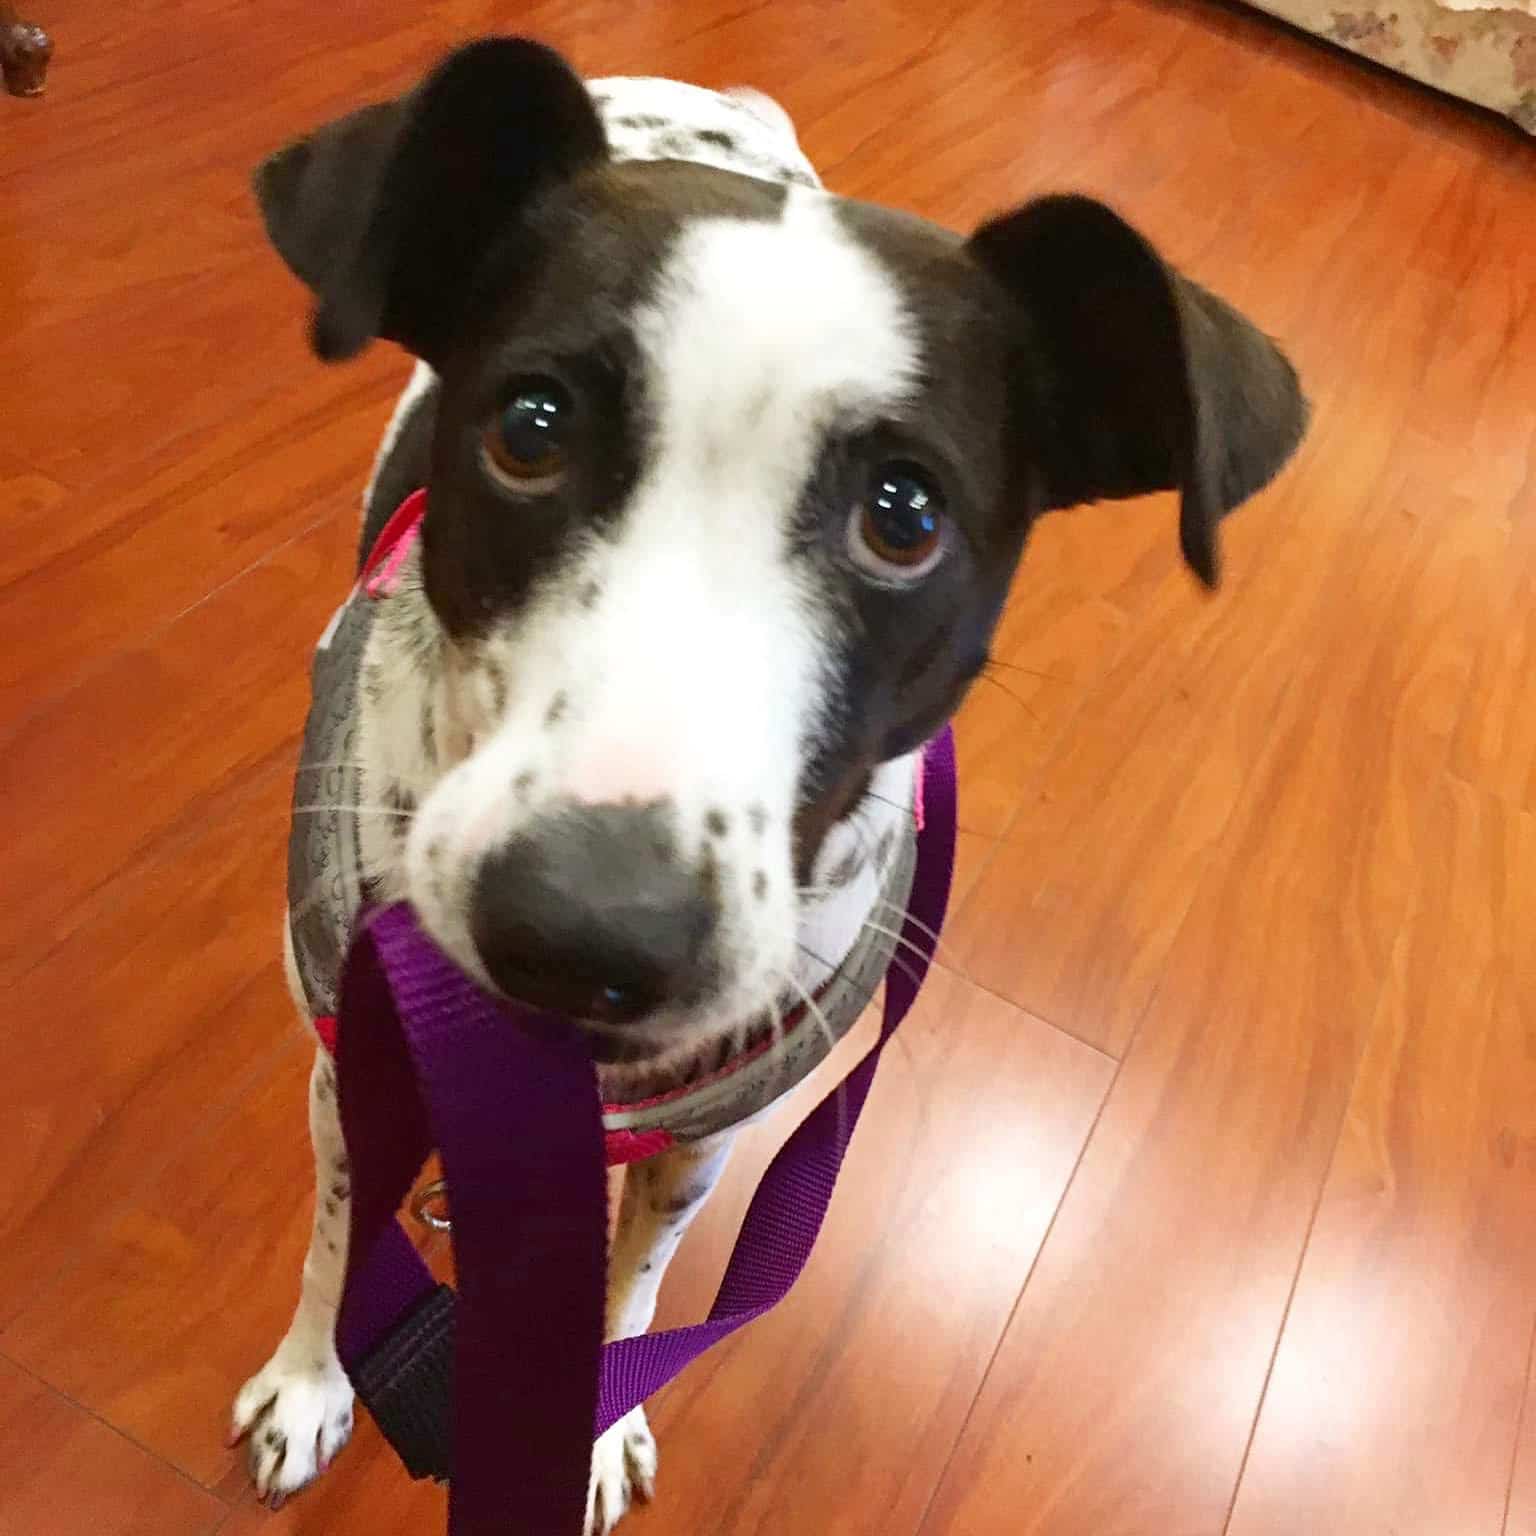 Dog Gets TOO Excited Before A Walk? How To Teach Her To Stop Barking Without Killing Her Joy